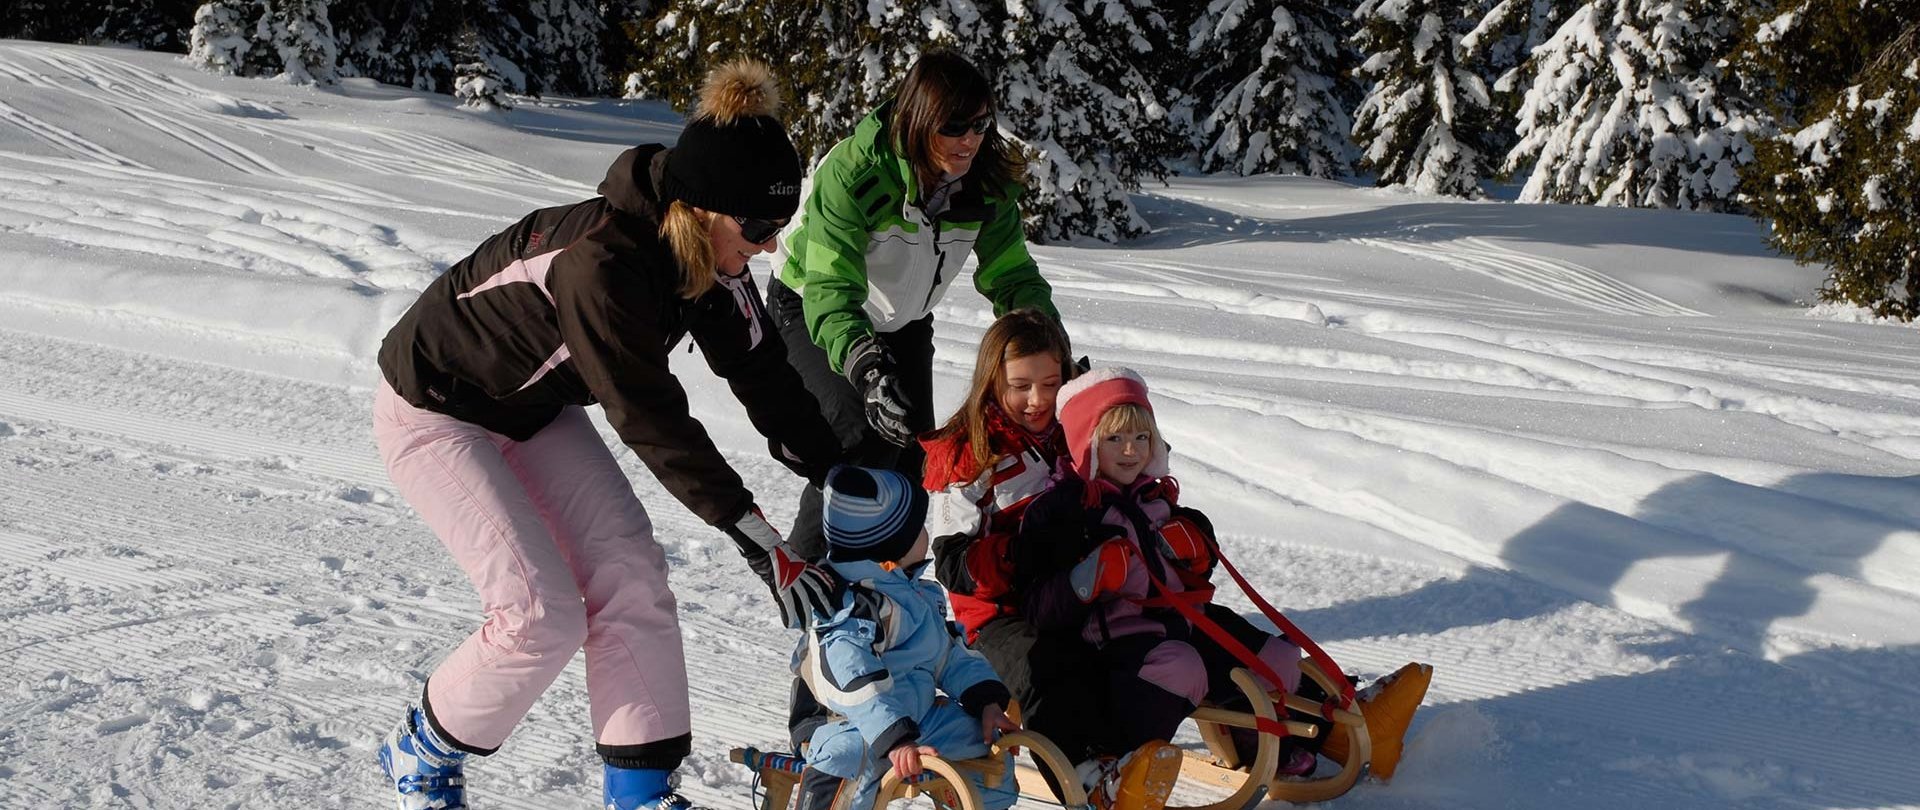 Winter fun for the whole family